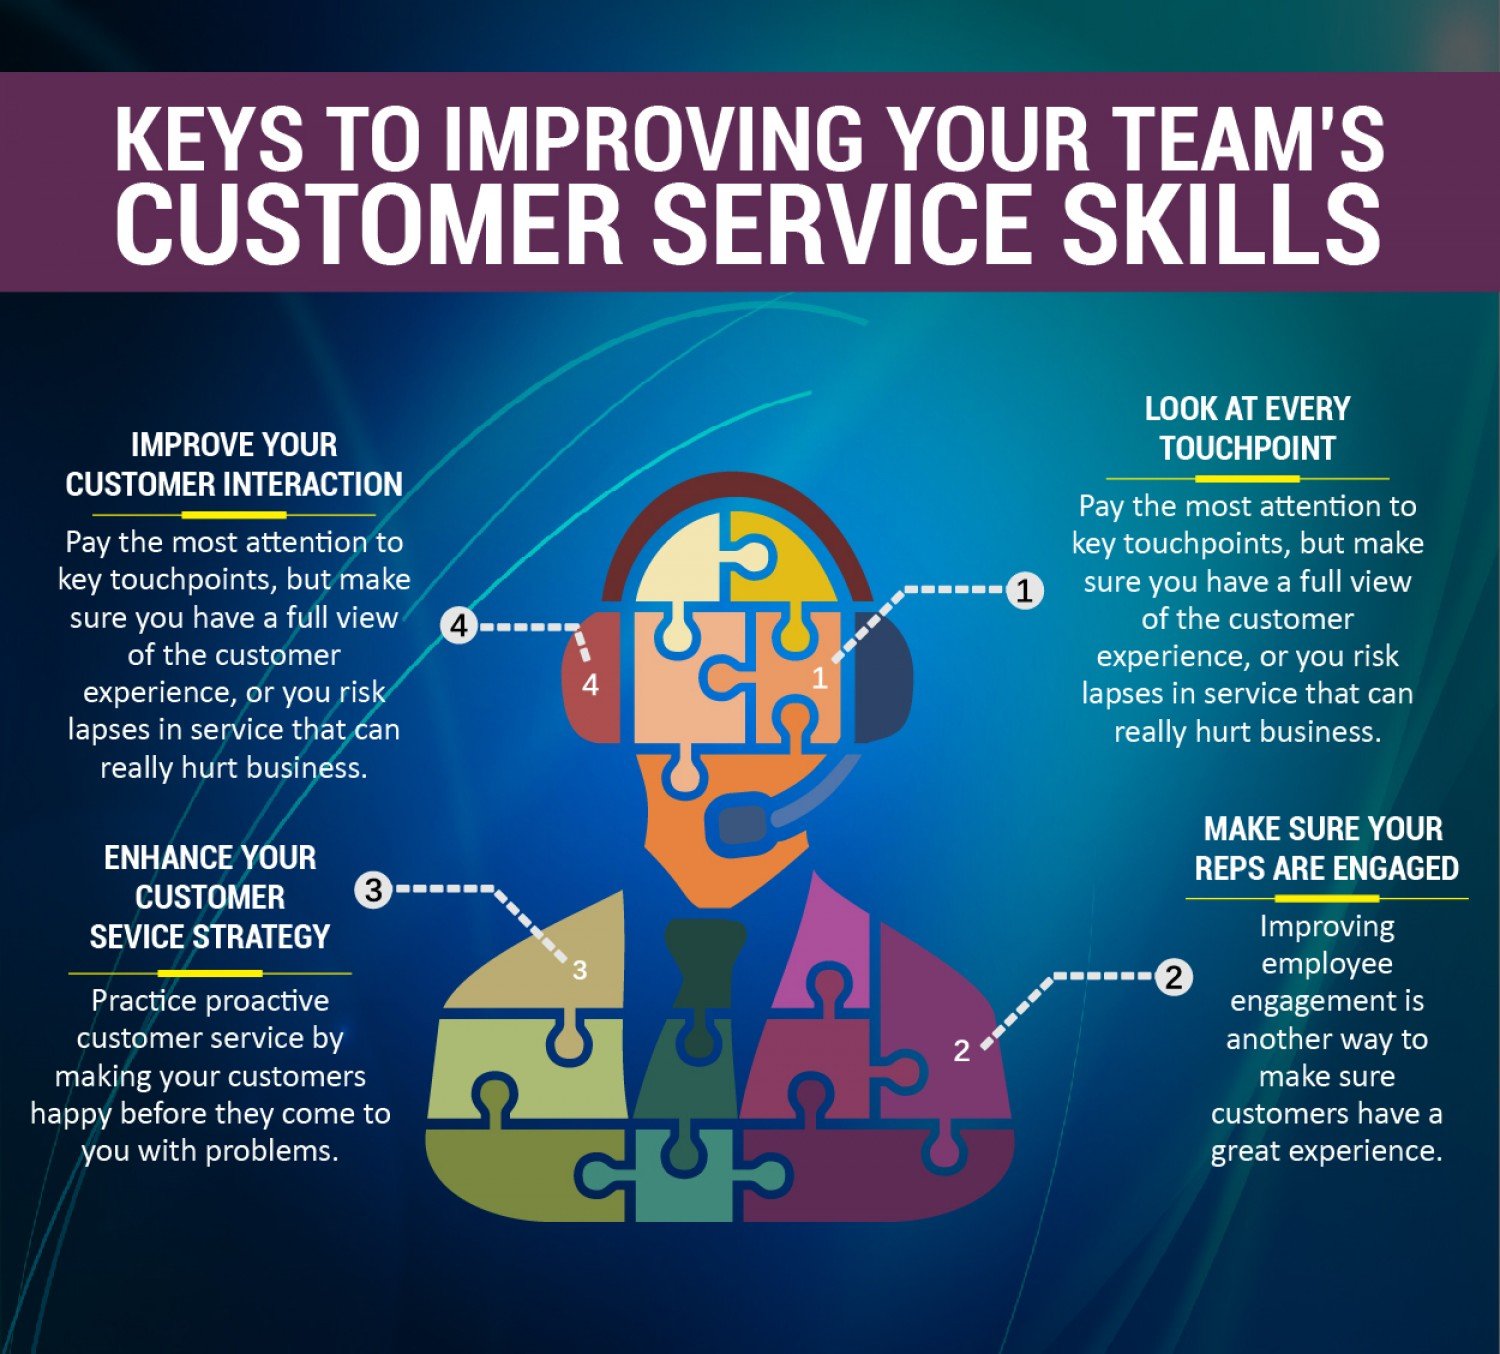 4 Tips to Apply for Improved Customer Service Skills